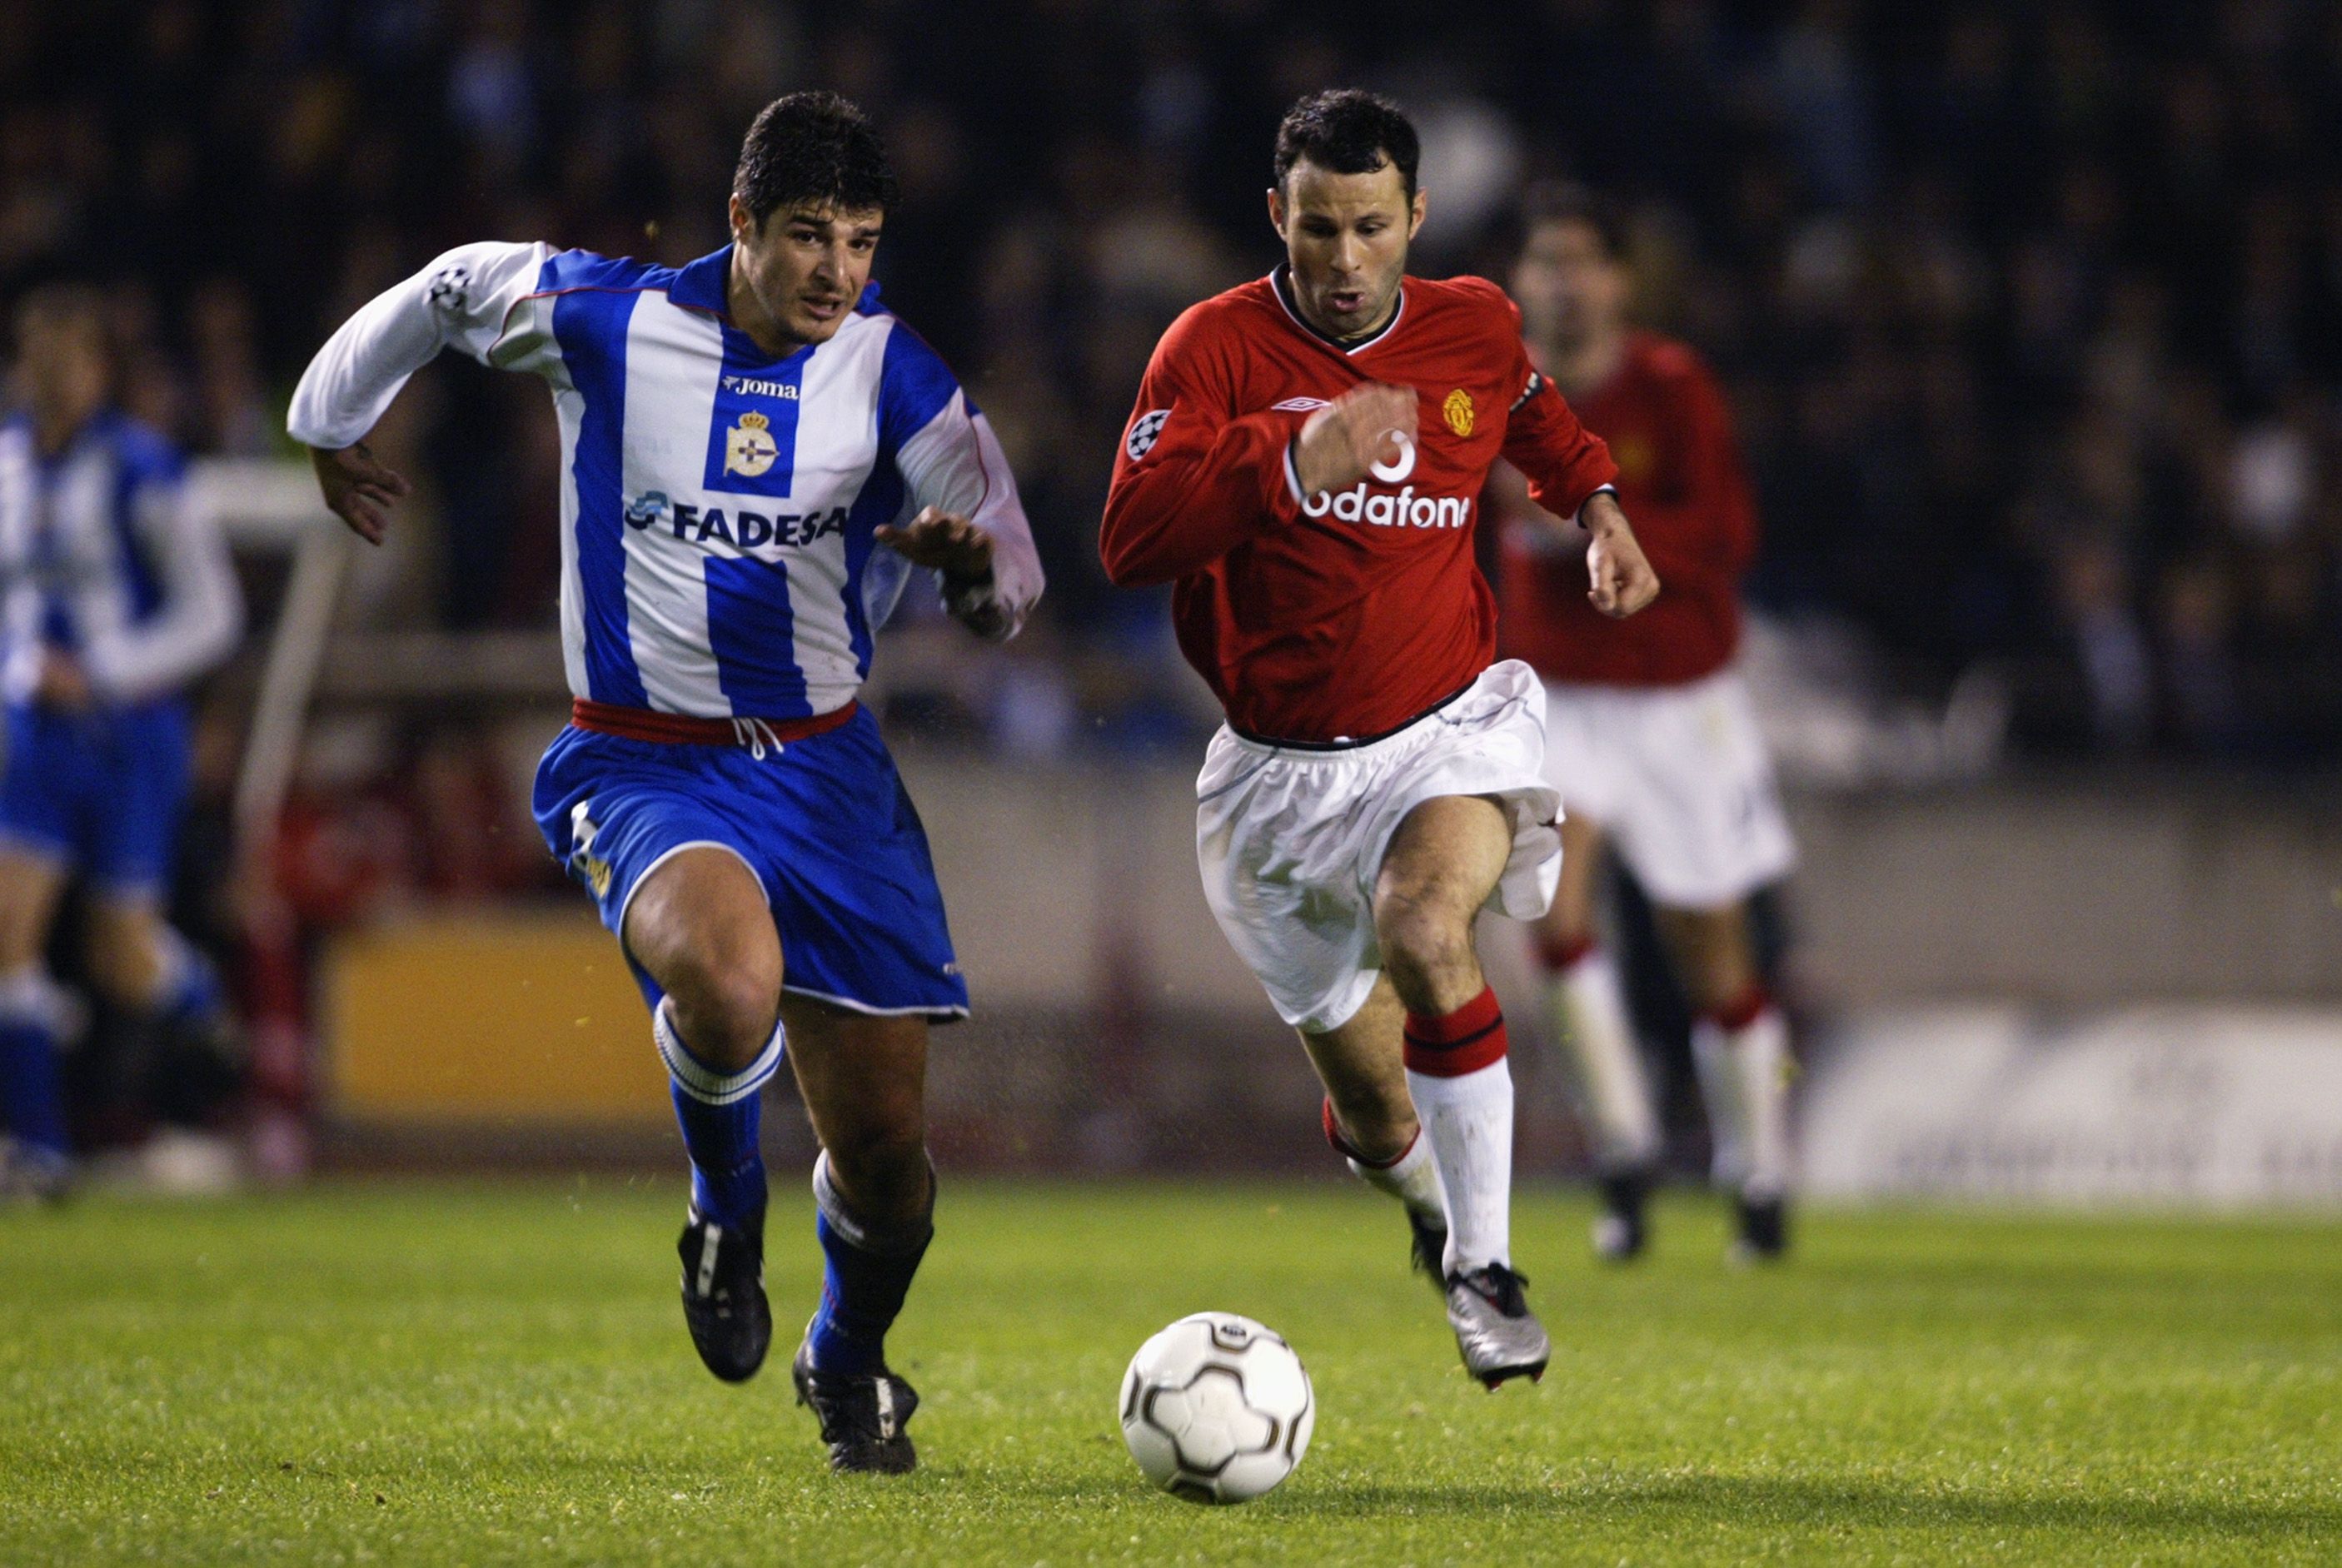 Ryan Giggs of Manchester United uses his pace to beat Lionel Scaloni of Deportivo La Coruna to create a goalscoring chance during the UEFA Champions League quarter-final first leg match played at Estadio Municipal de Riazor, in La Coruna, Spain. Manchester United won the match 2-1. DIGITAL IMAGE